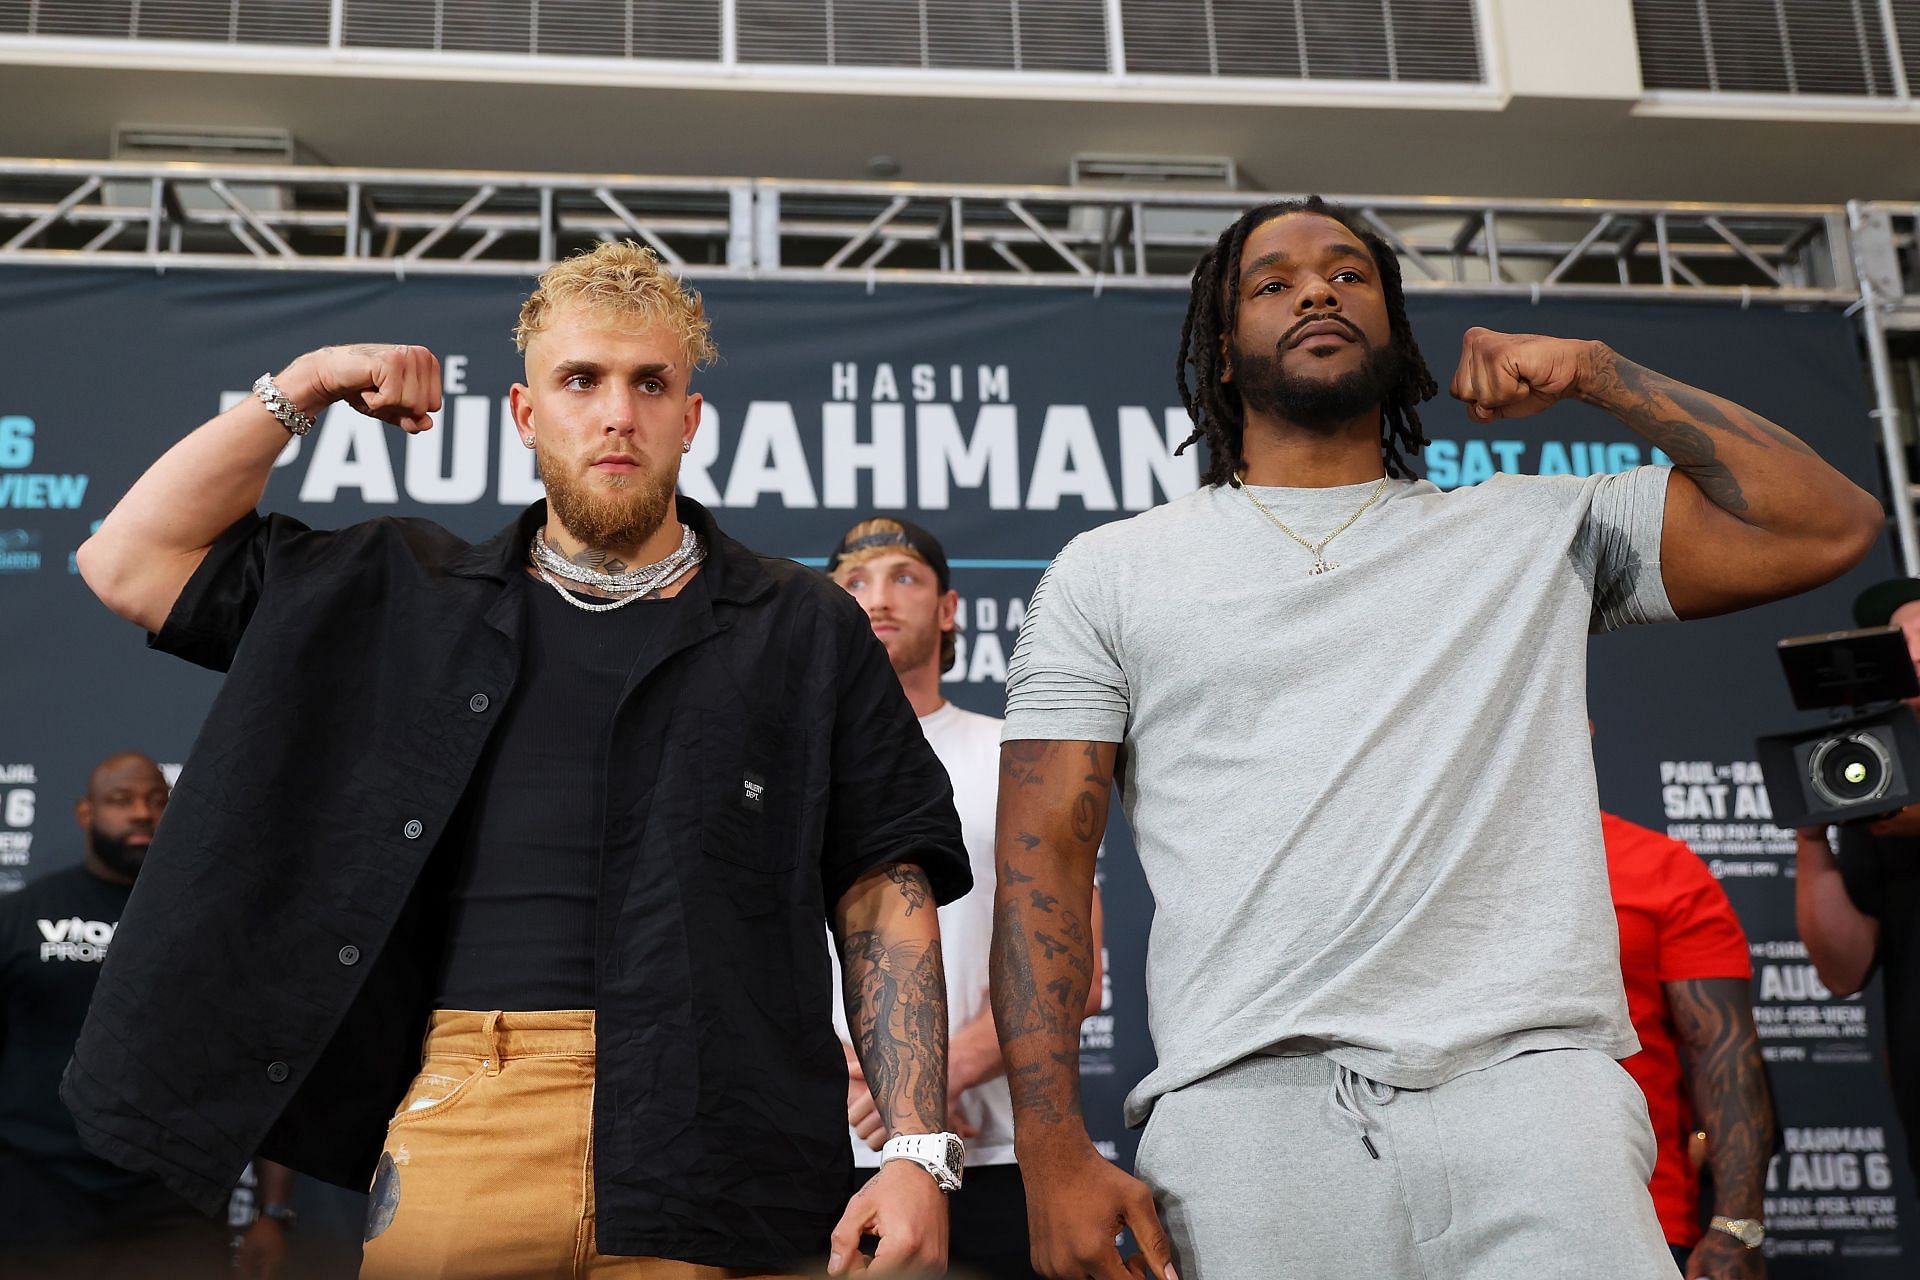 Jake Paul v Hasim Rahman Jr - Press Conference. (Photo by Mike Stobe/Getty Images)